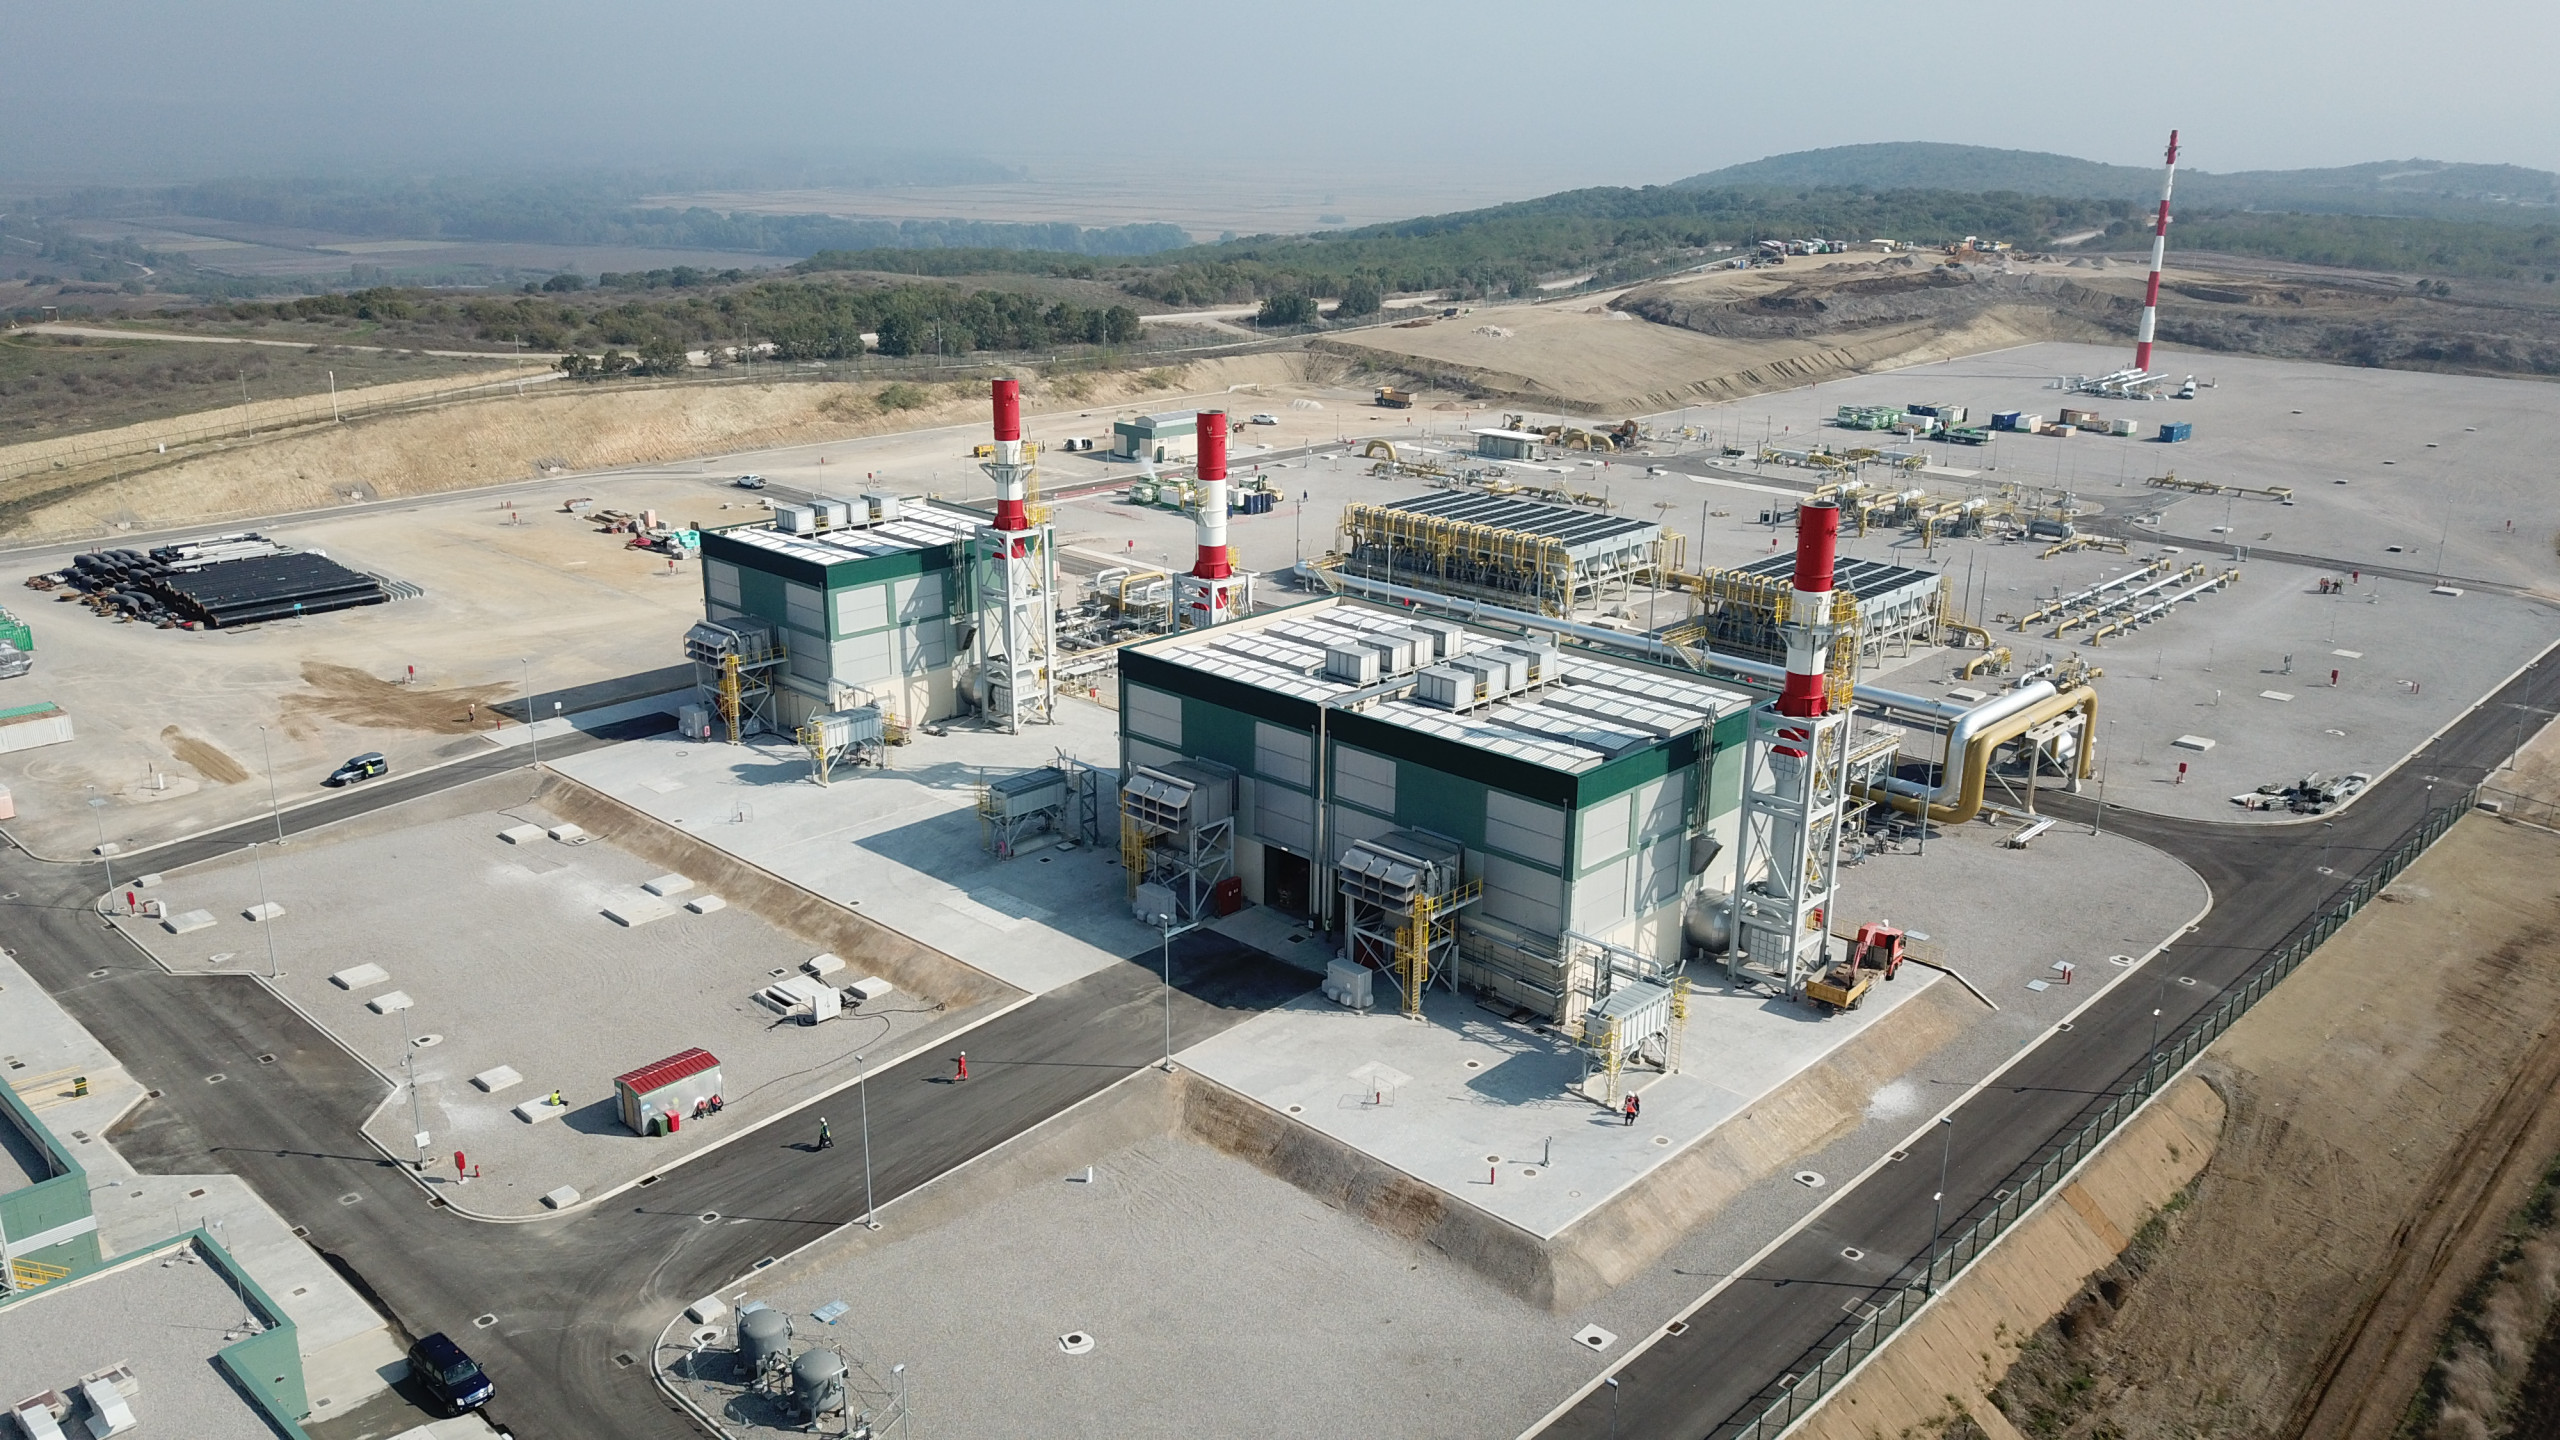 212-aerial-view-of-the-kipoi-compressor-station-greece-october-2019-16052958140313.jpg